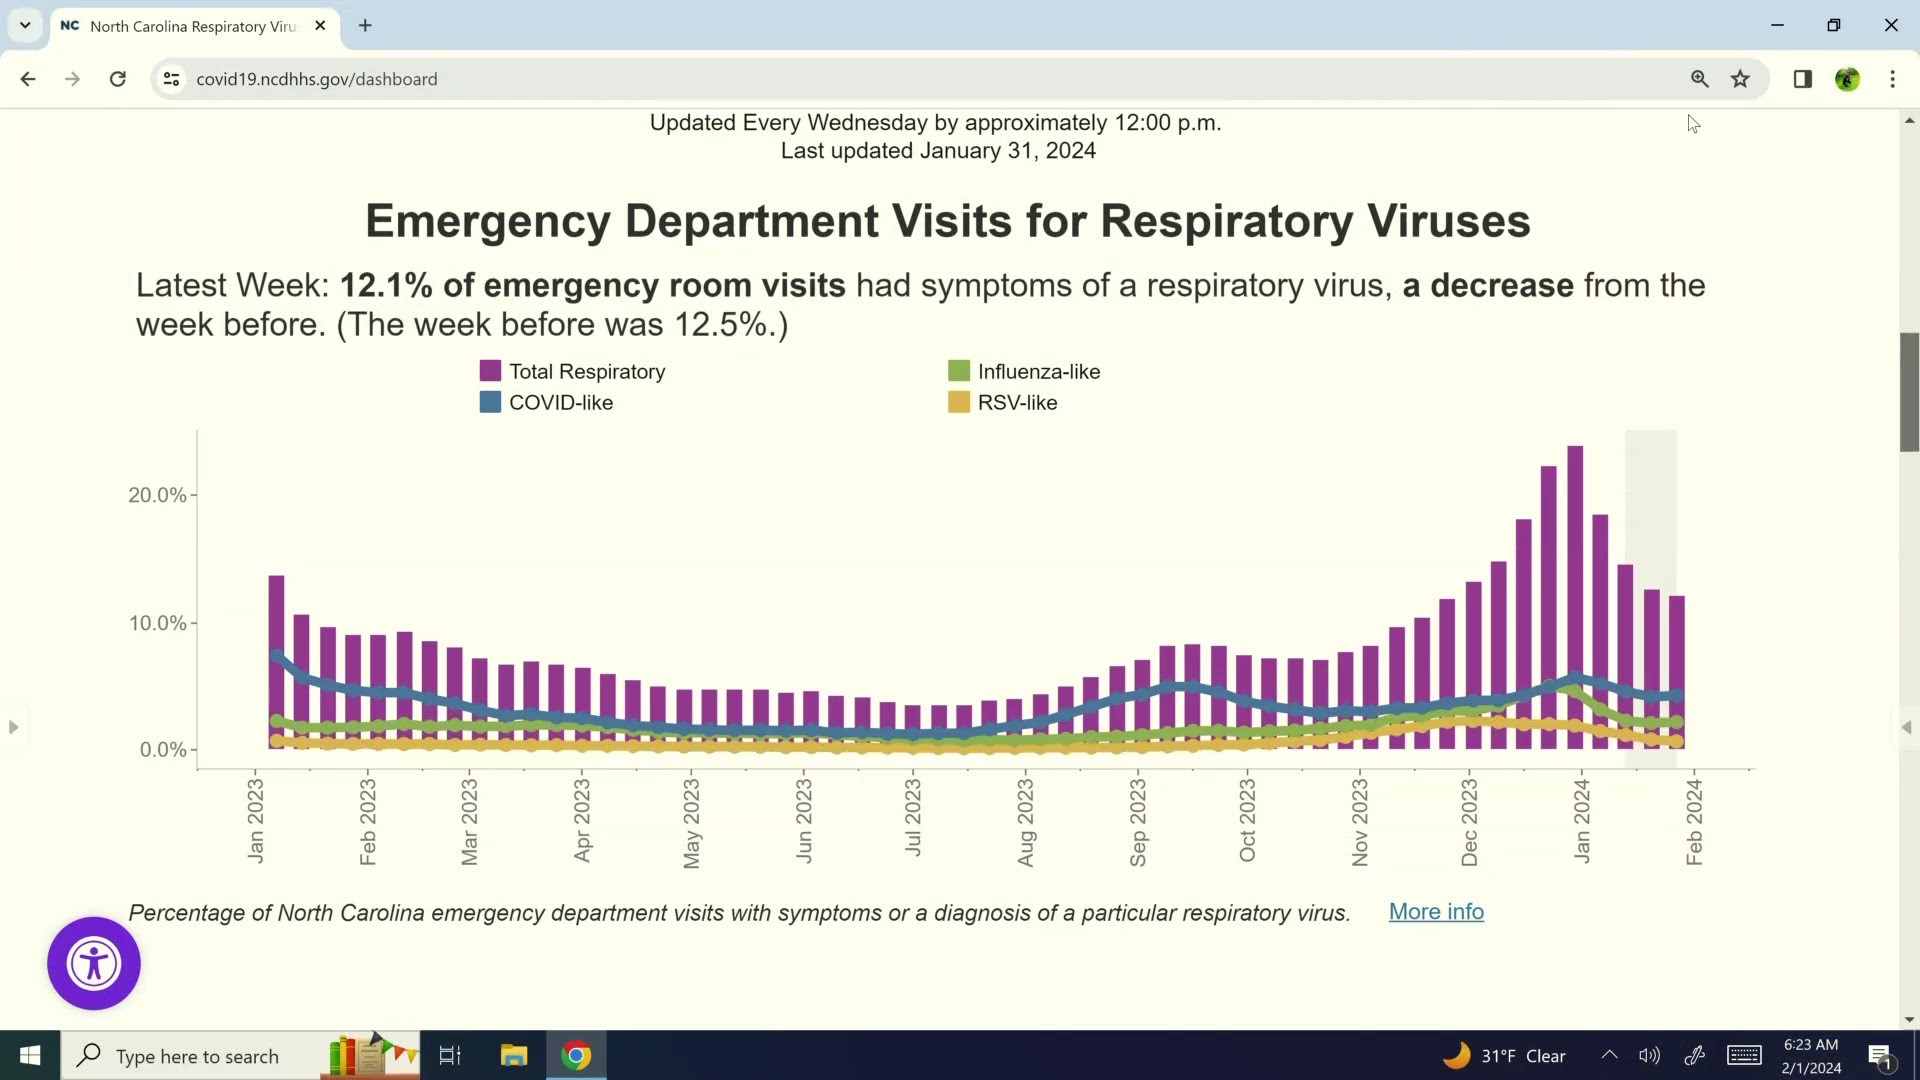 As respiratory viruses remain consistent in ERs, the 24-hour fever rule can help mitigate the spread.